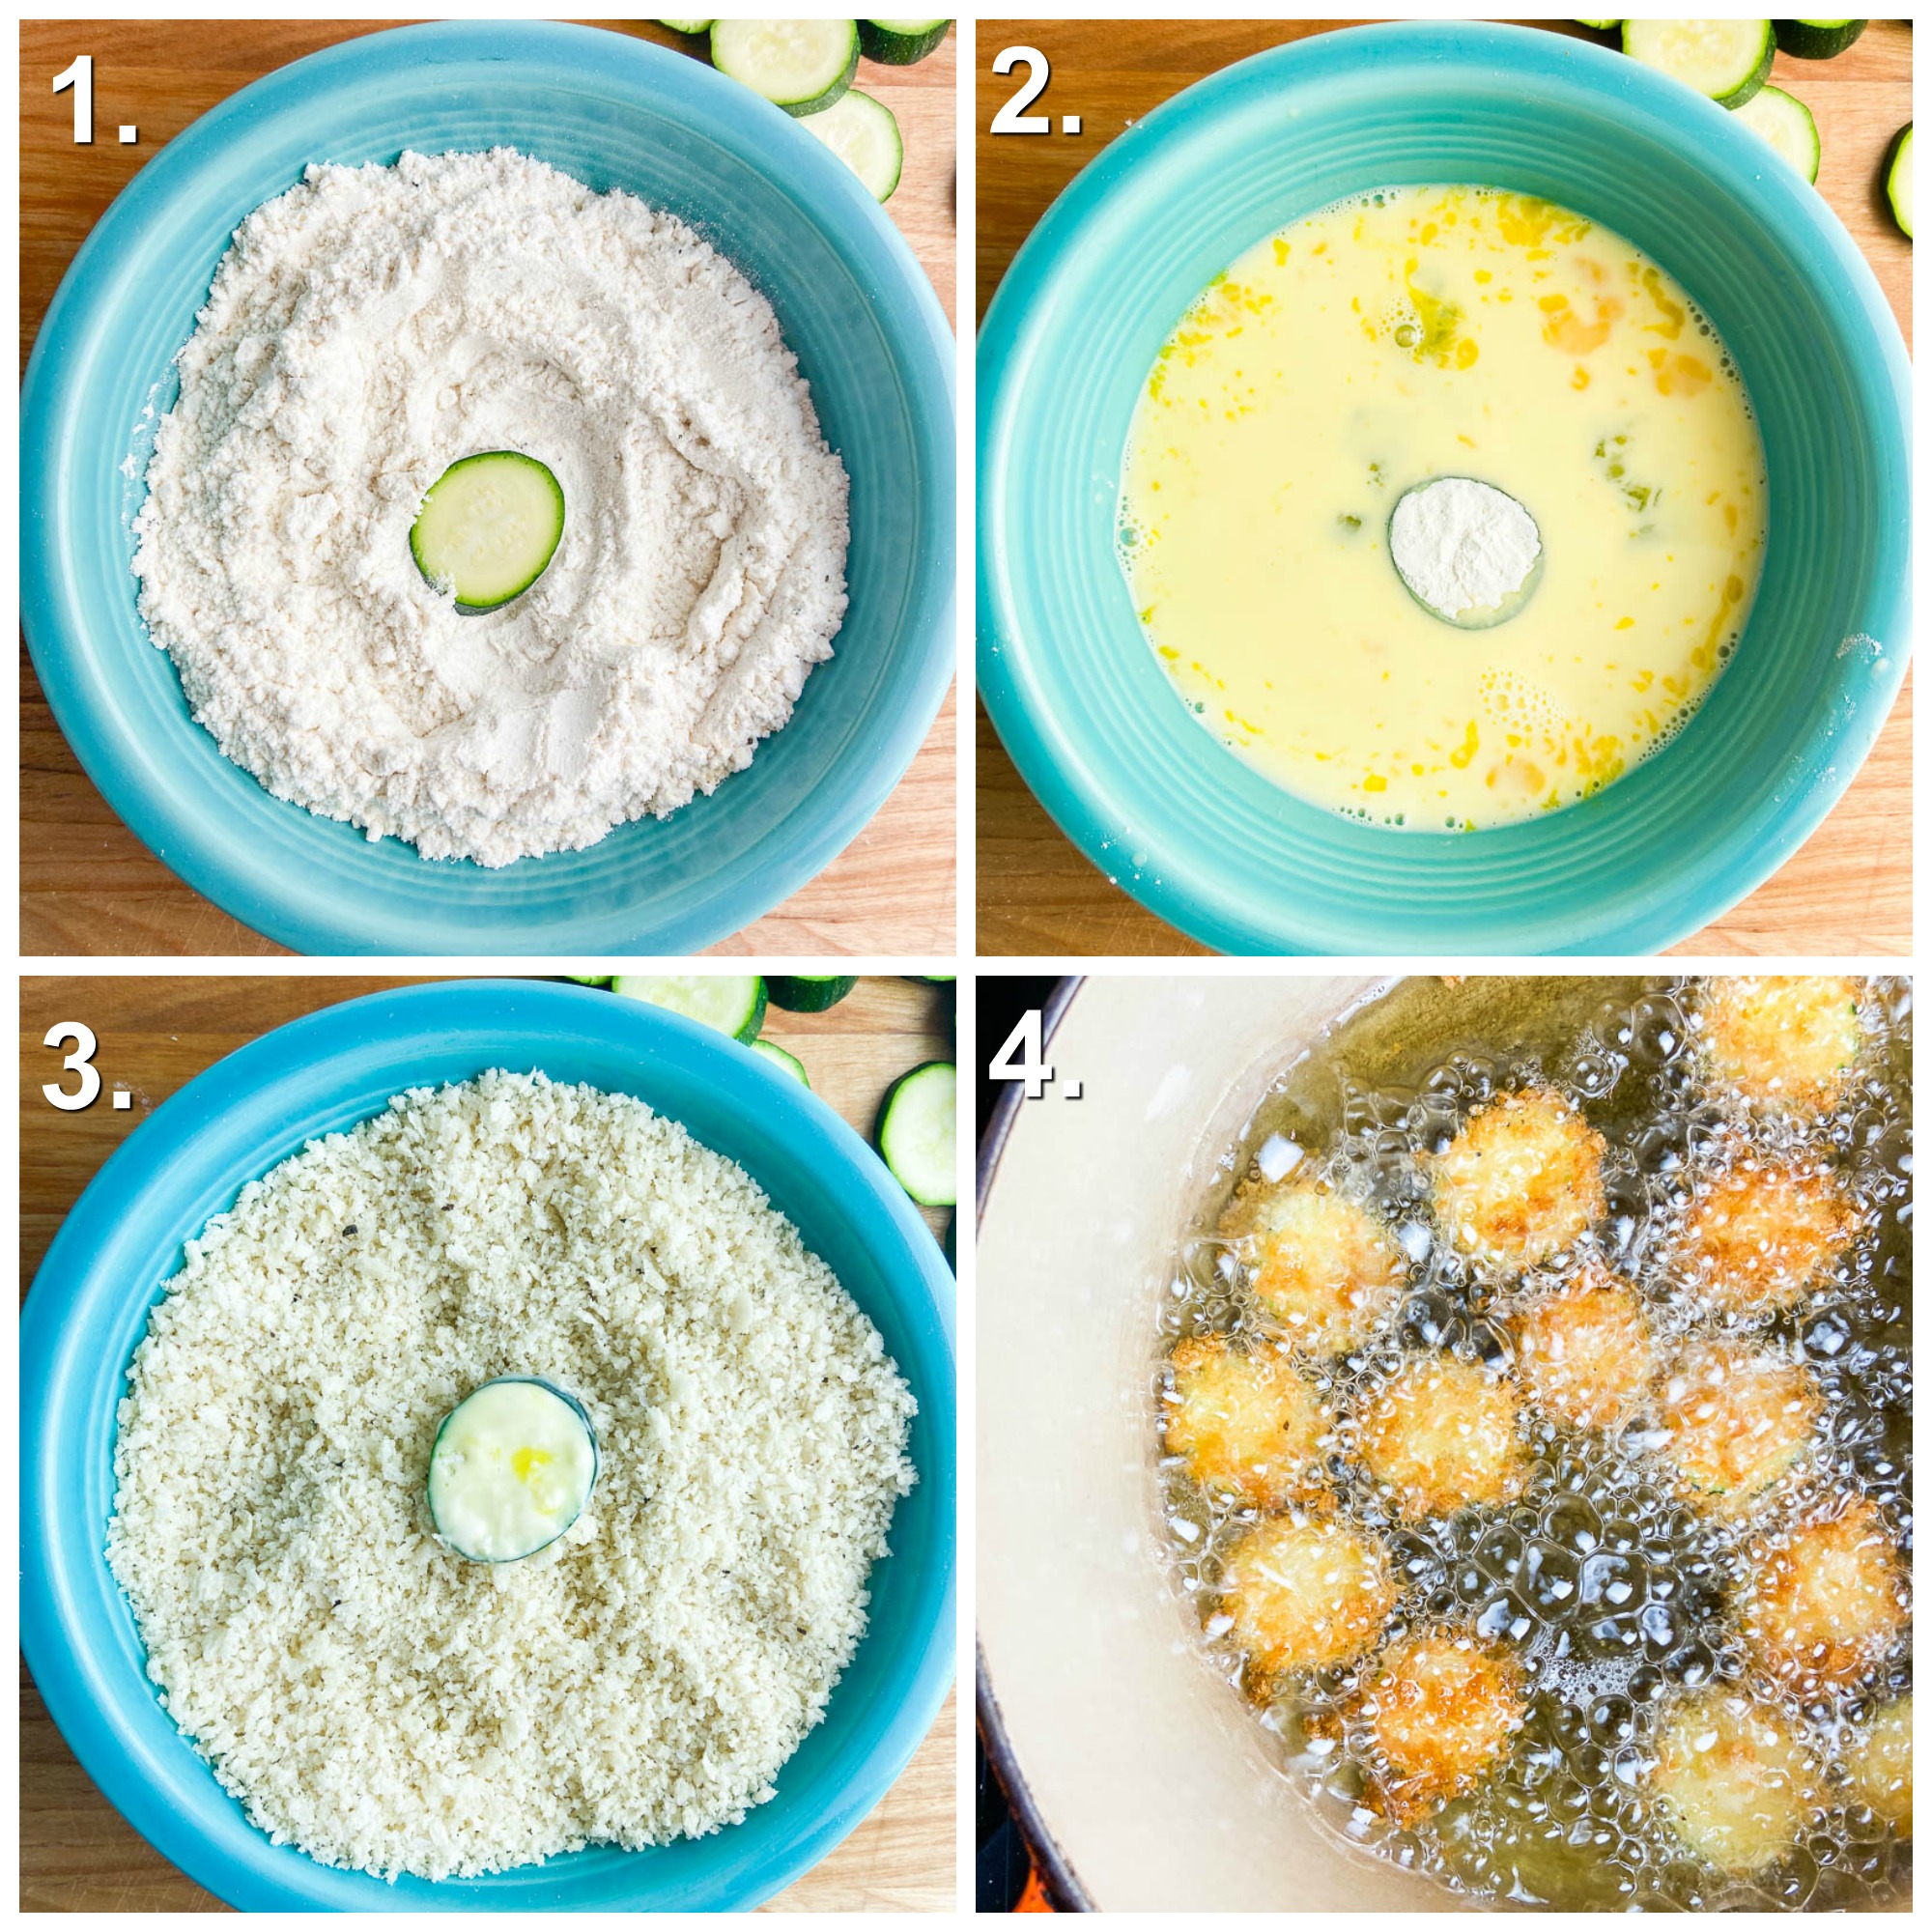 4 photos for how to make fried zucchini. Photo 1: dredging the zucchini round in flour in a teal bowl. Photo 2: Dipping the flour in egg/milk wash in teal bowl. Step 3: Dredging zucchini in panko bread crumbs in seasoned bowl. Step 4: Frying zucchini